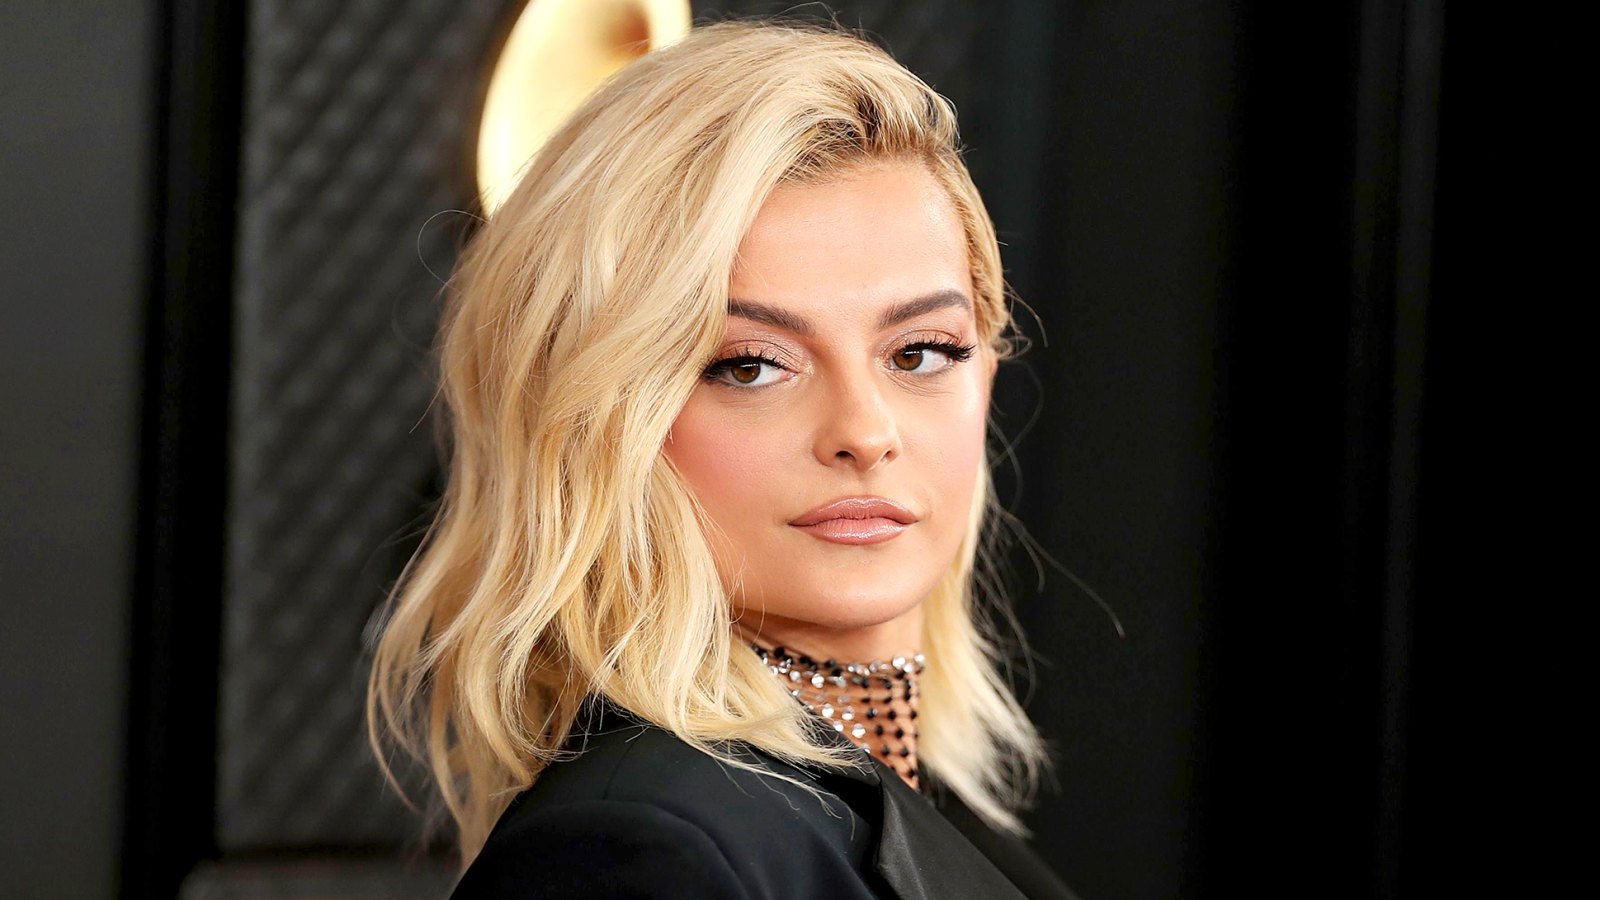 Bebe-Rexha-Wants-to-'Normalize'-Bipolar-Disorder-After-Diagnosis